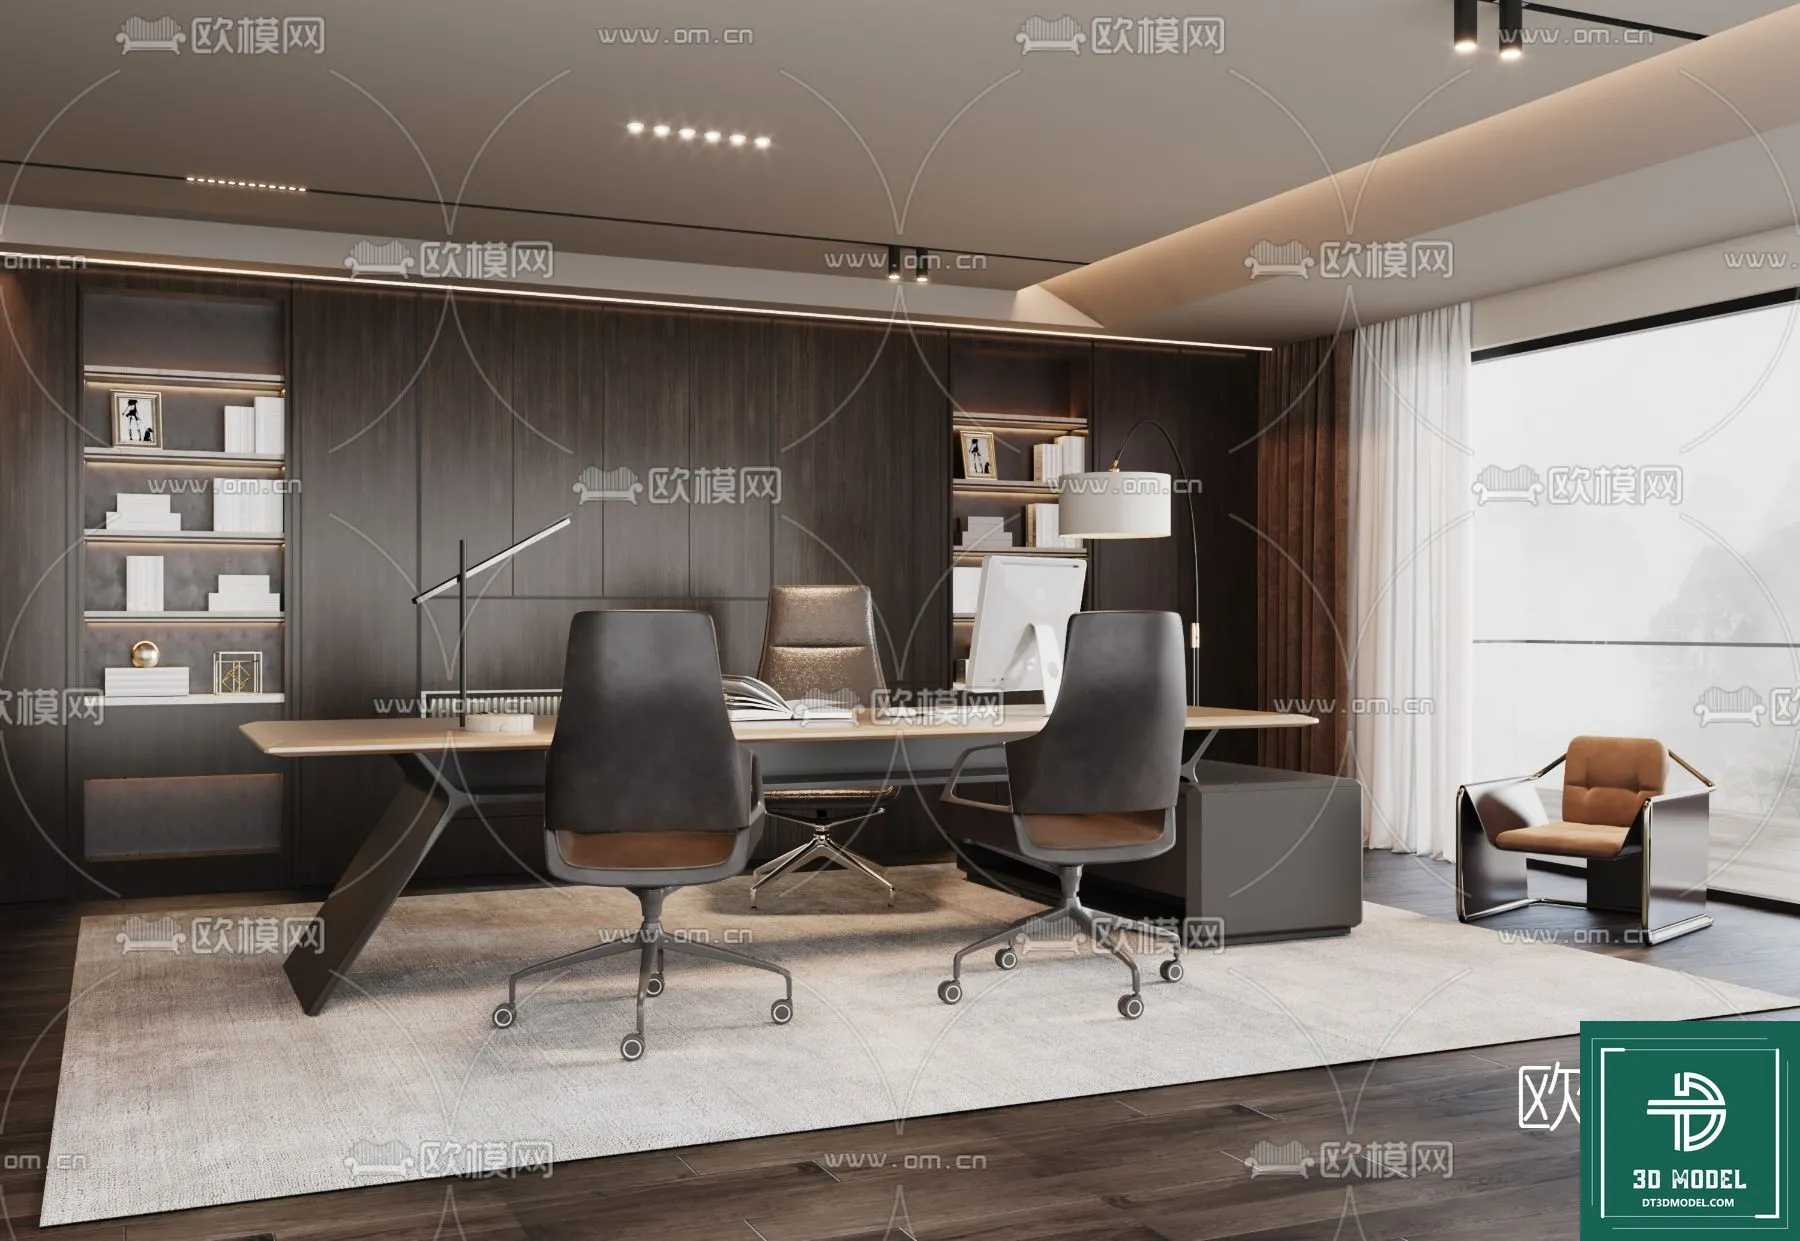 OFFICE ROOM FOR MANAGER – 3DMODEL – 039